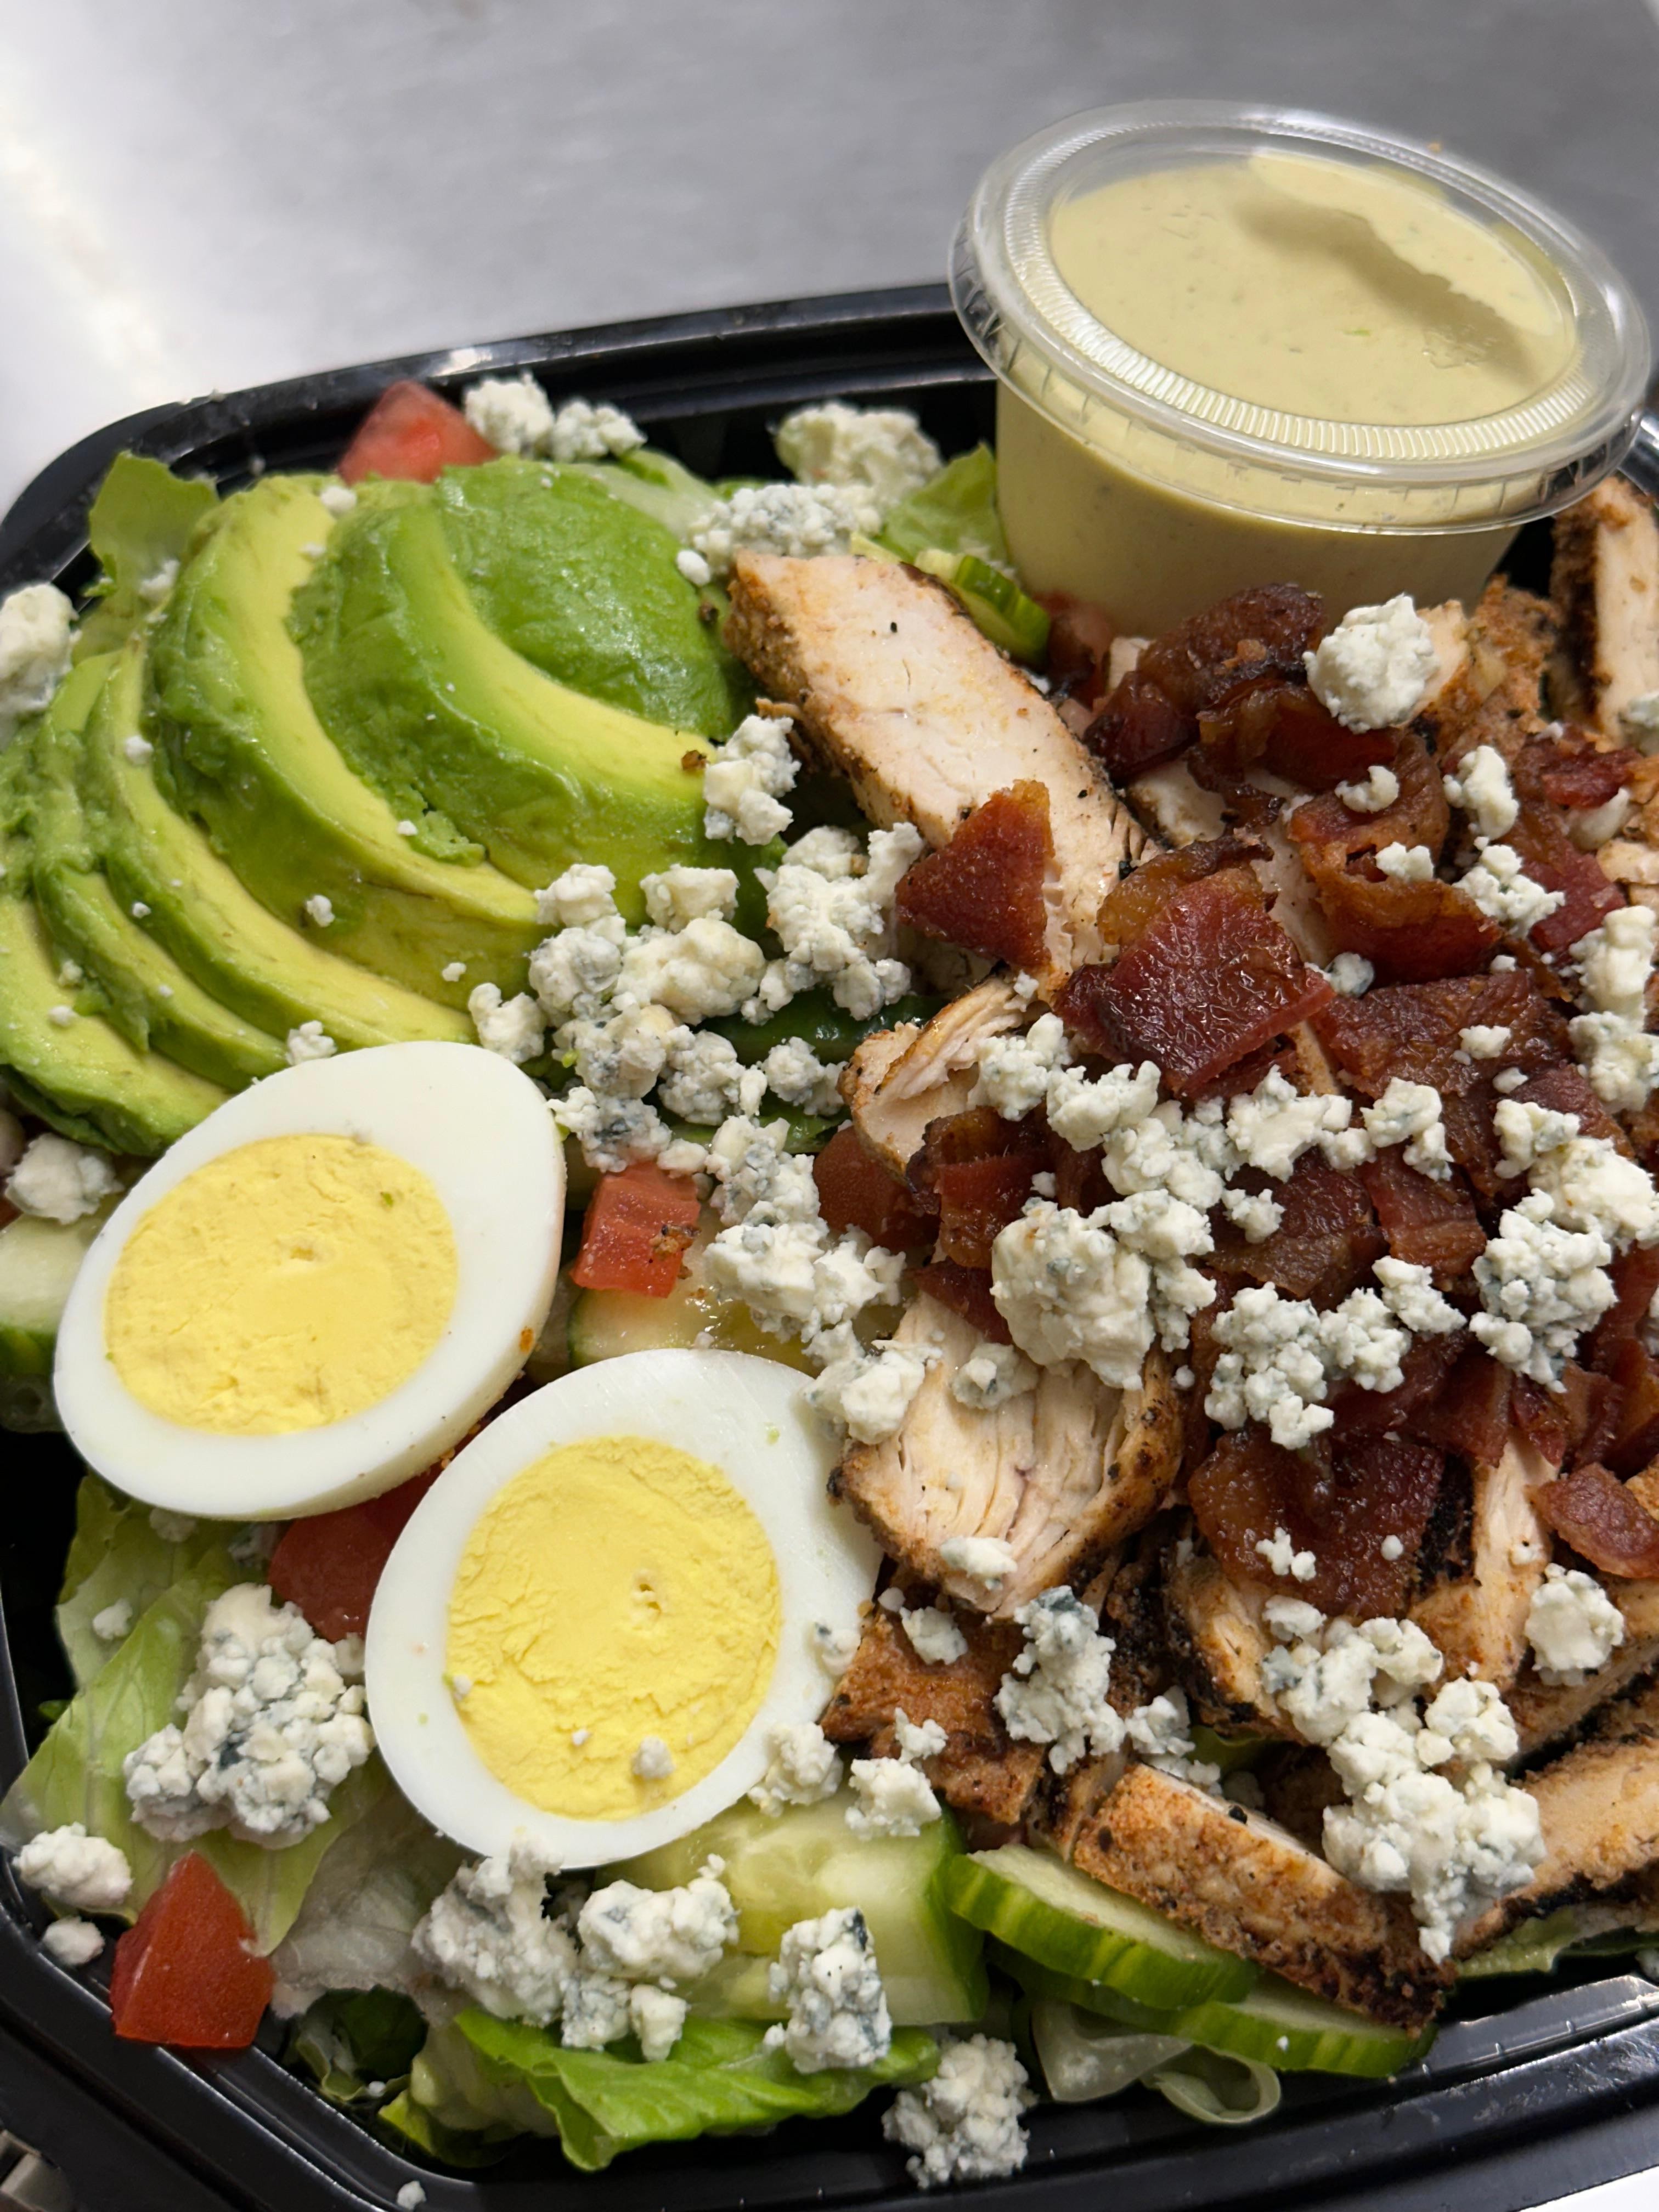 SALAD - COBB (romaine, egg, blue cheese crumble, tomato, bacon, chicken, cucumbers and avocado)